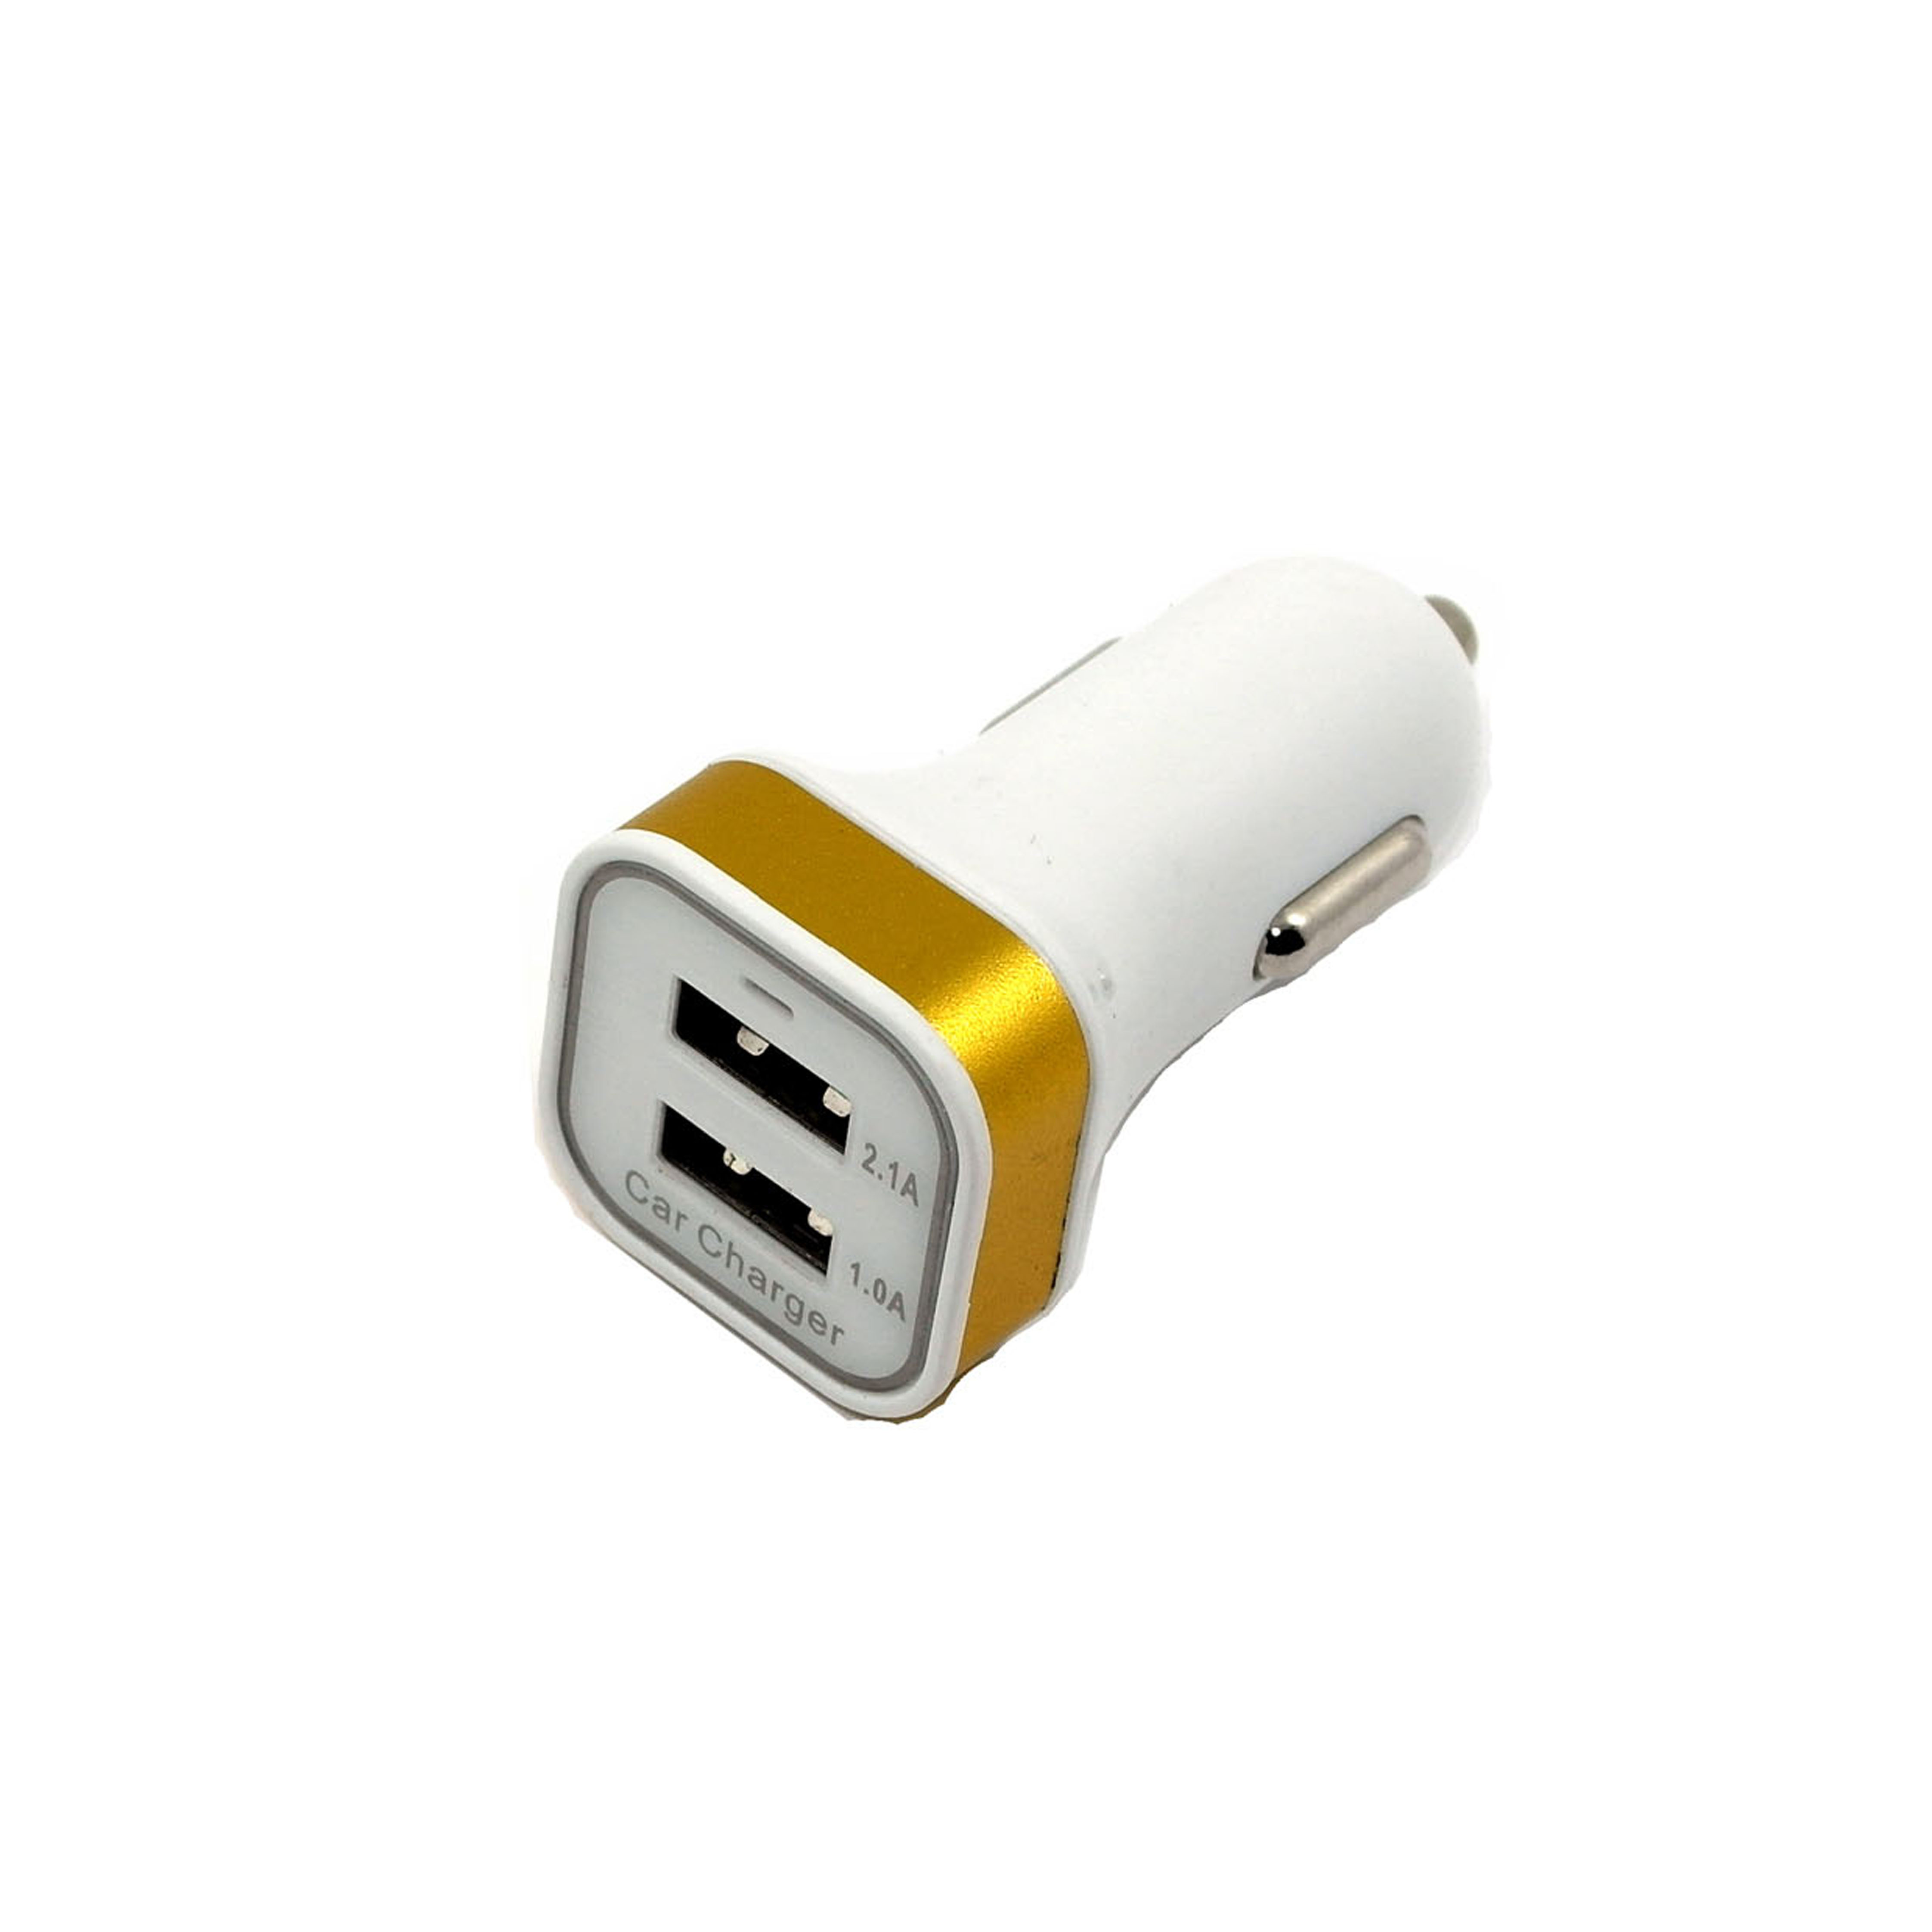 car charger, Dual USB In-car Charger, USB Charger